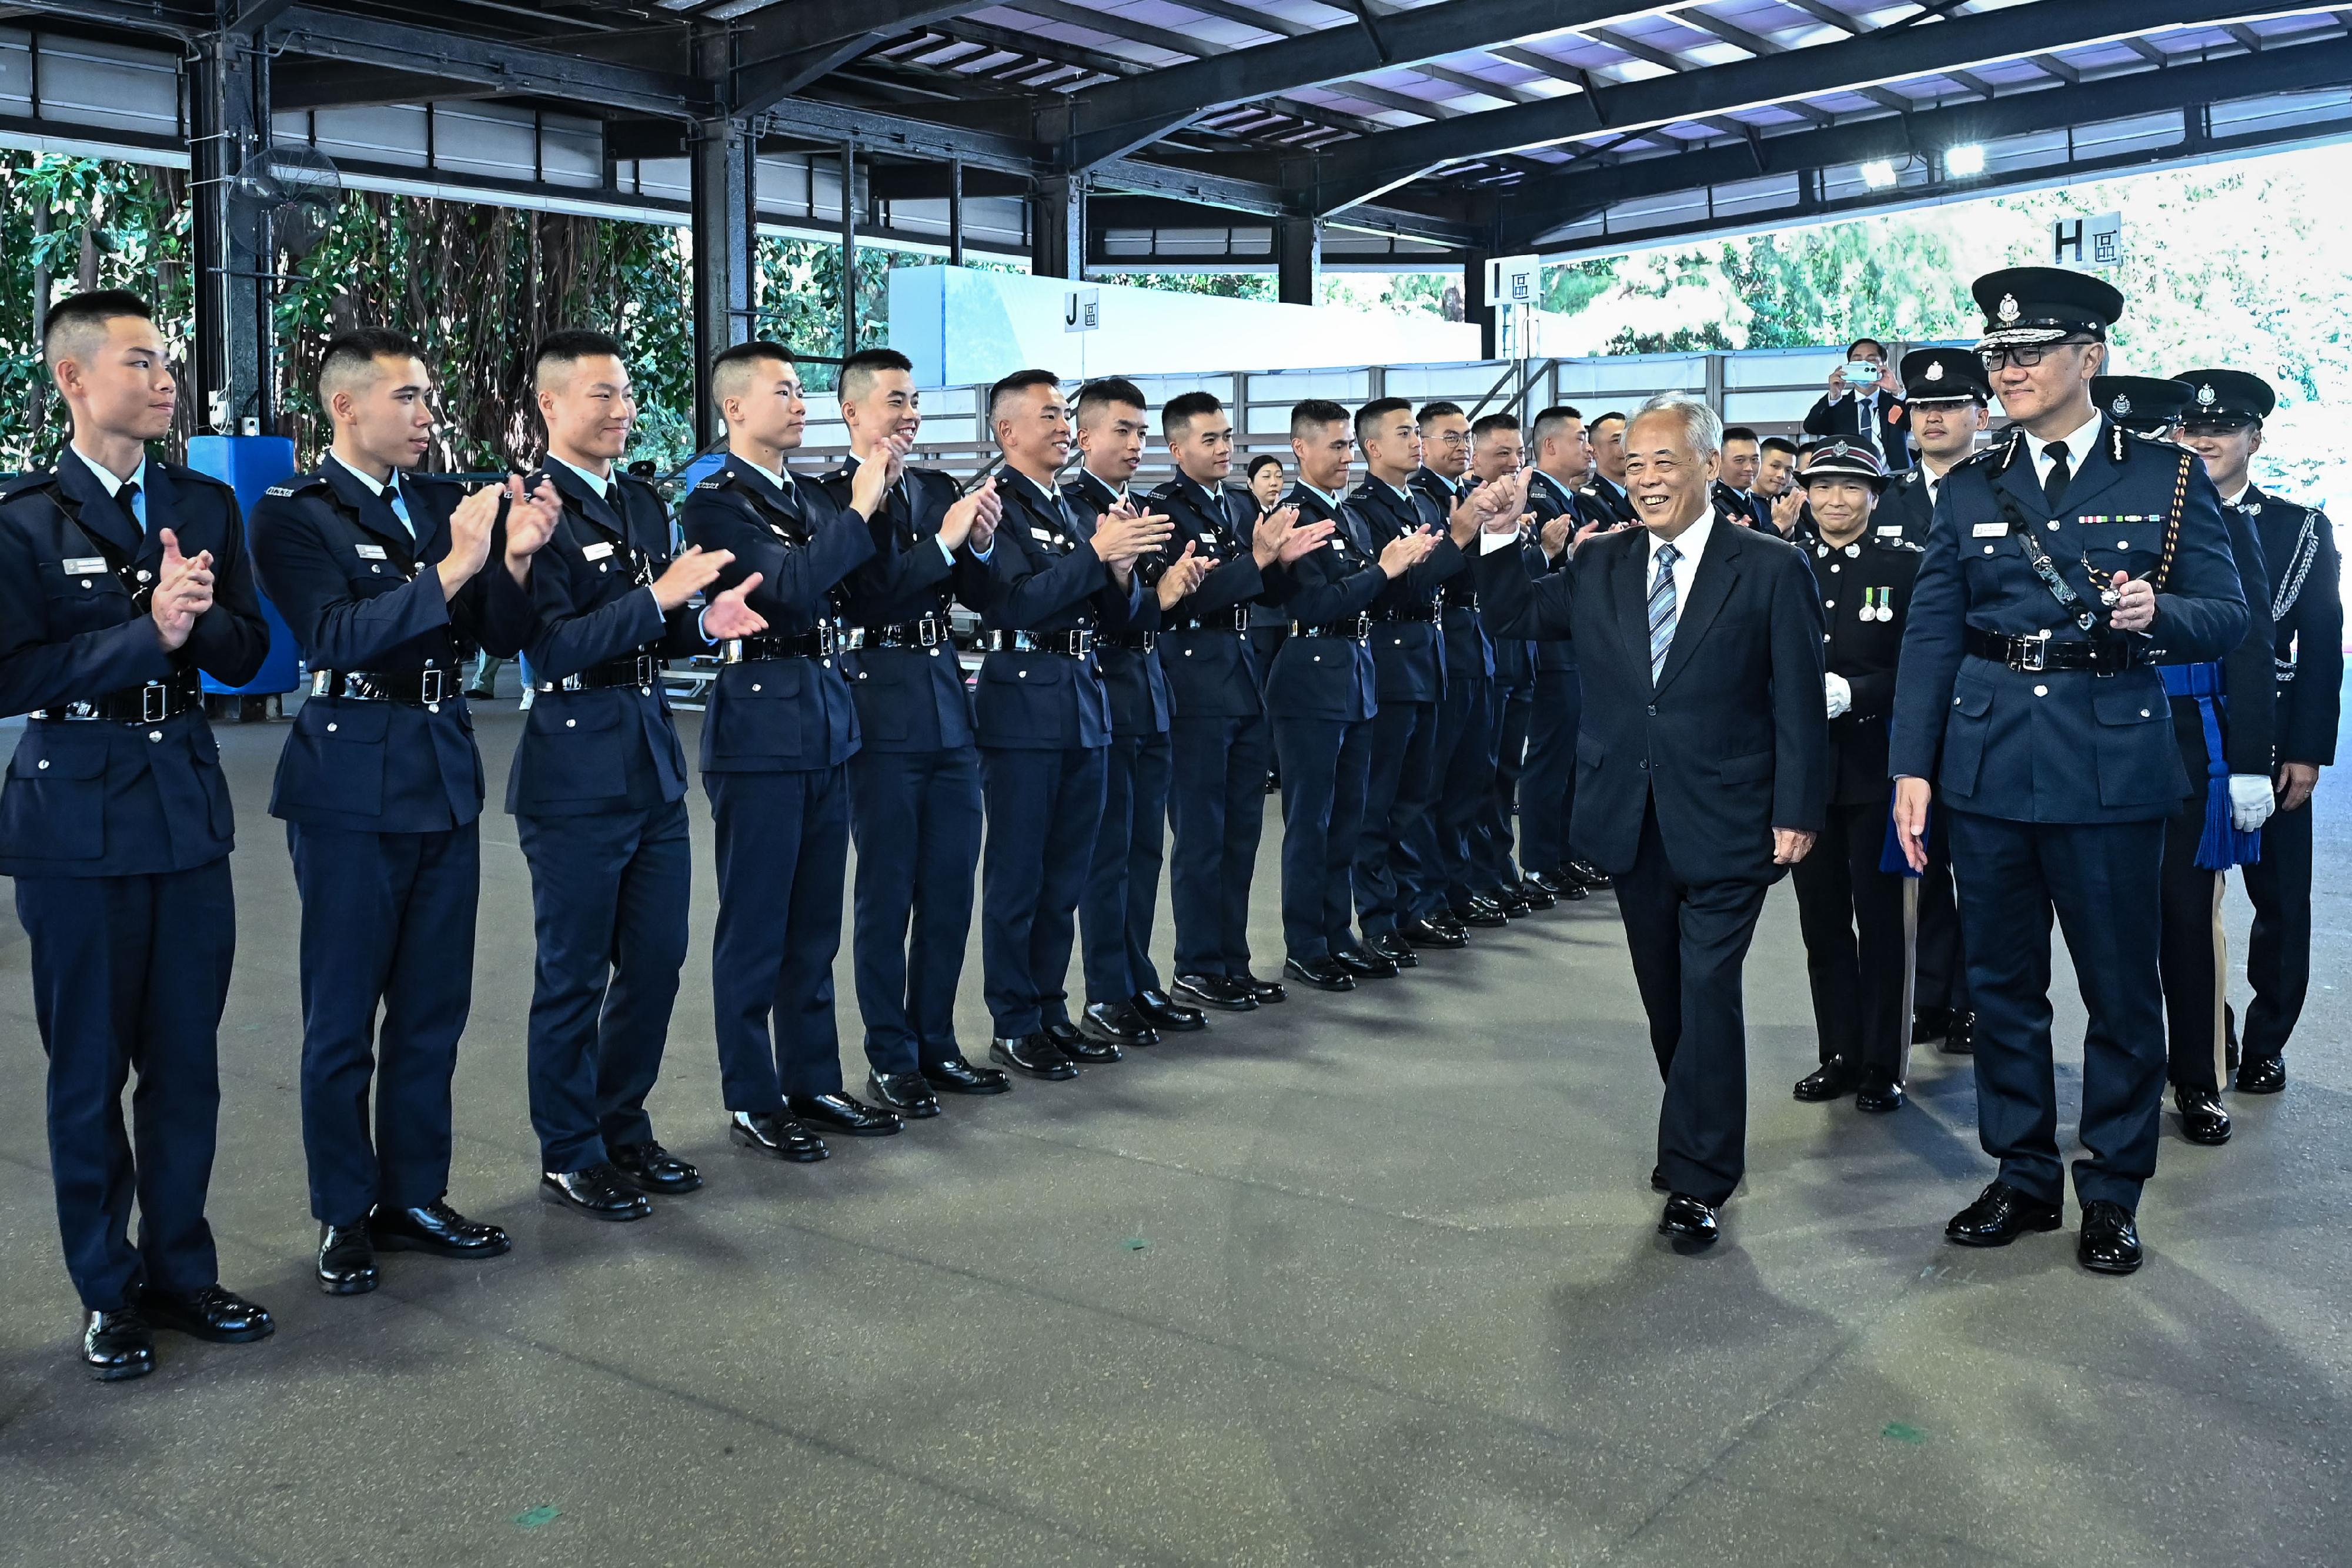 The Commissioner on Interception of Communications and Surveillance, Mr Yeung Chun-kuen (front row, second right), accompanied by the Commissioner of Police, Mr Siu Chak-yee (front row, first right), meets graduates after the passing-out parade held at the Hong Kong Police College today (November 25).